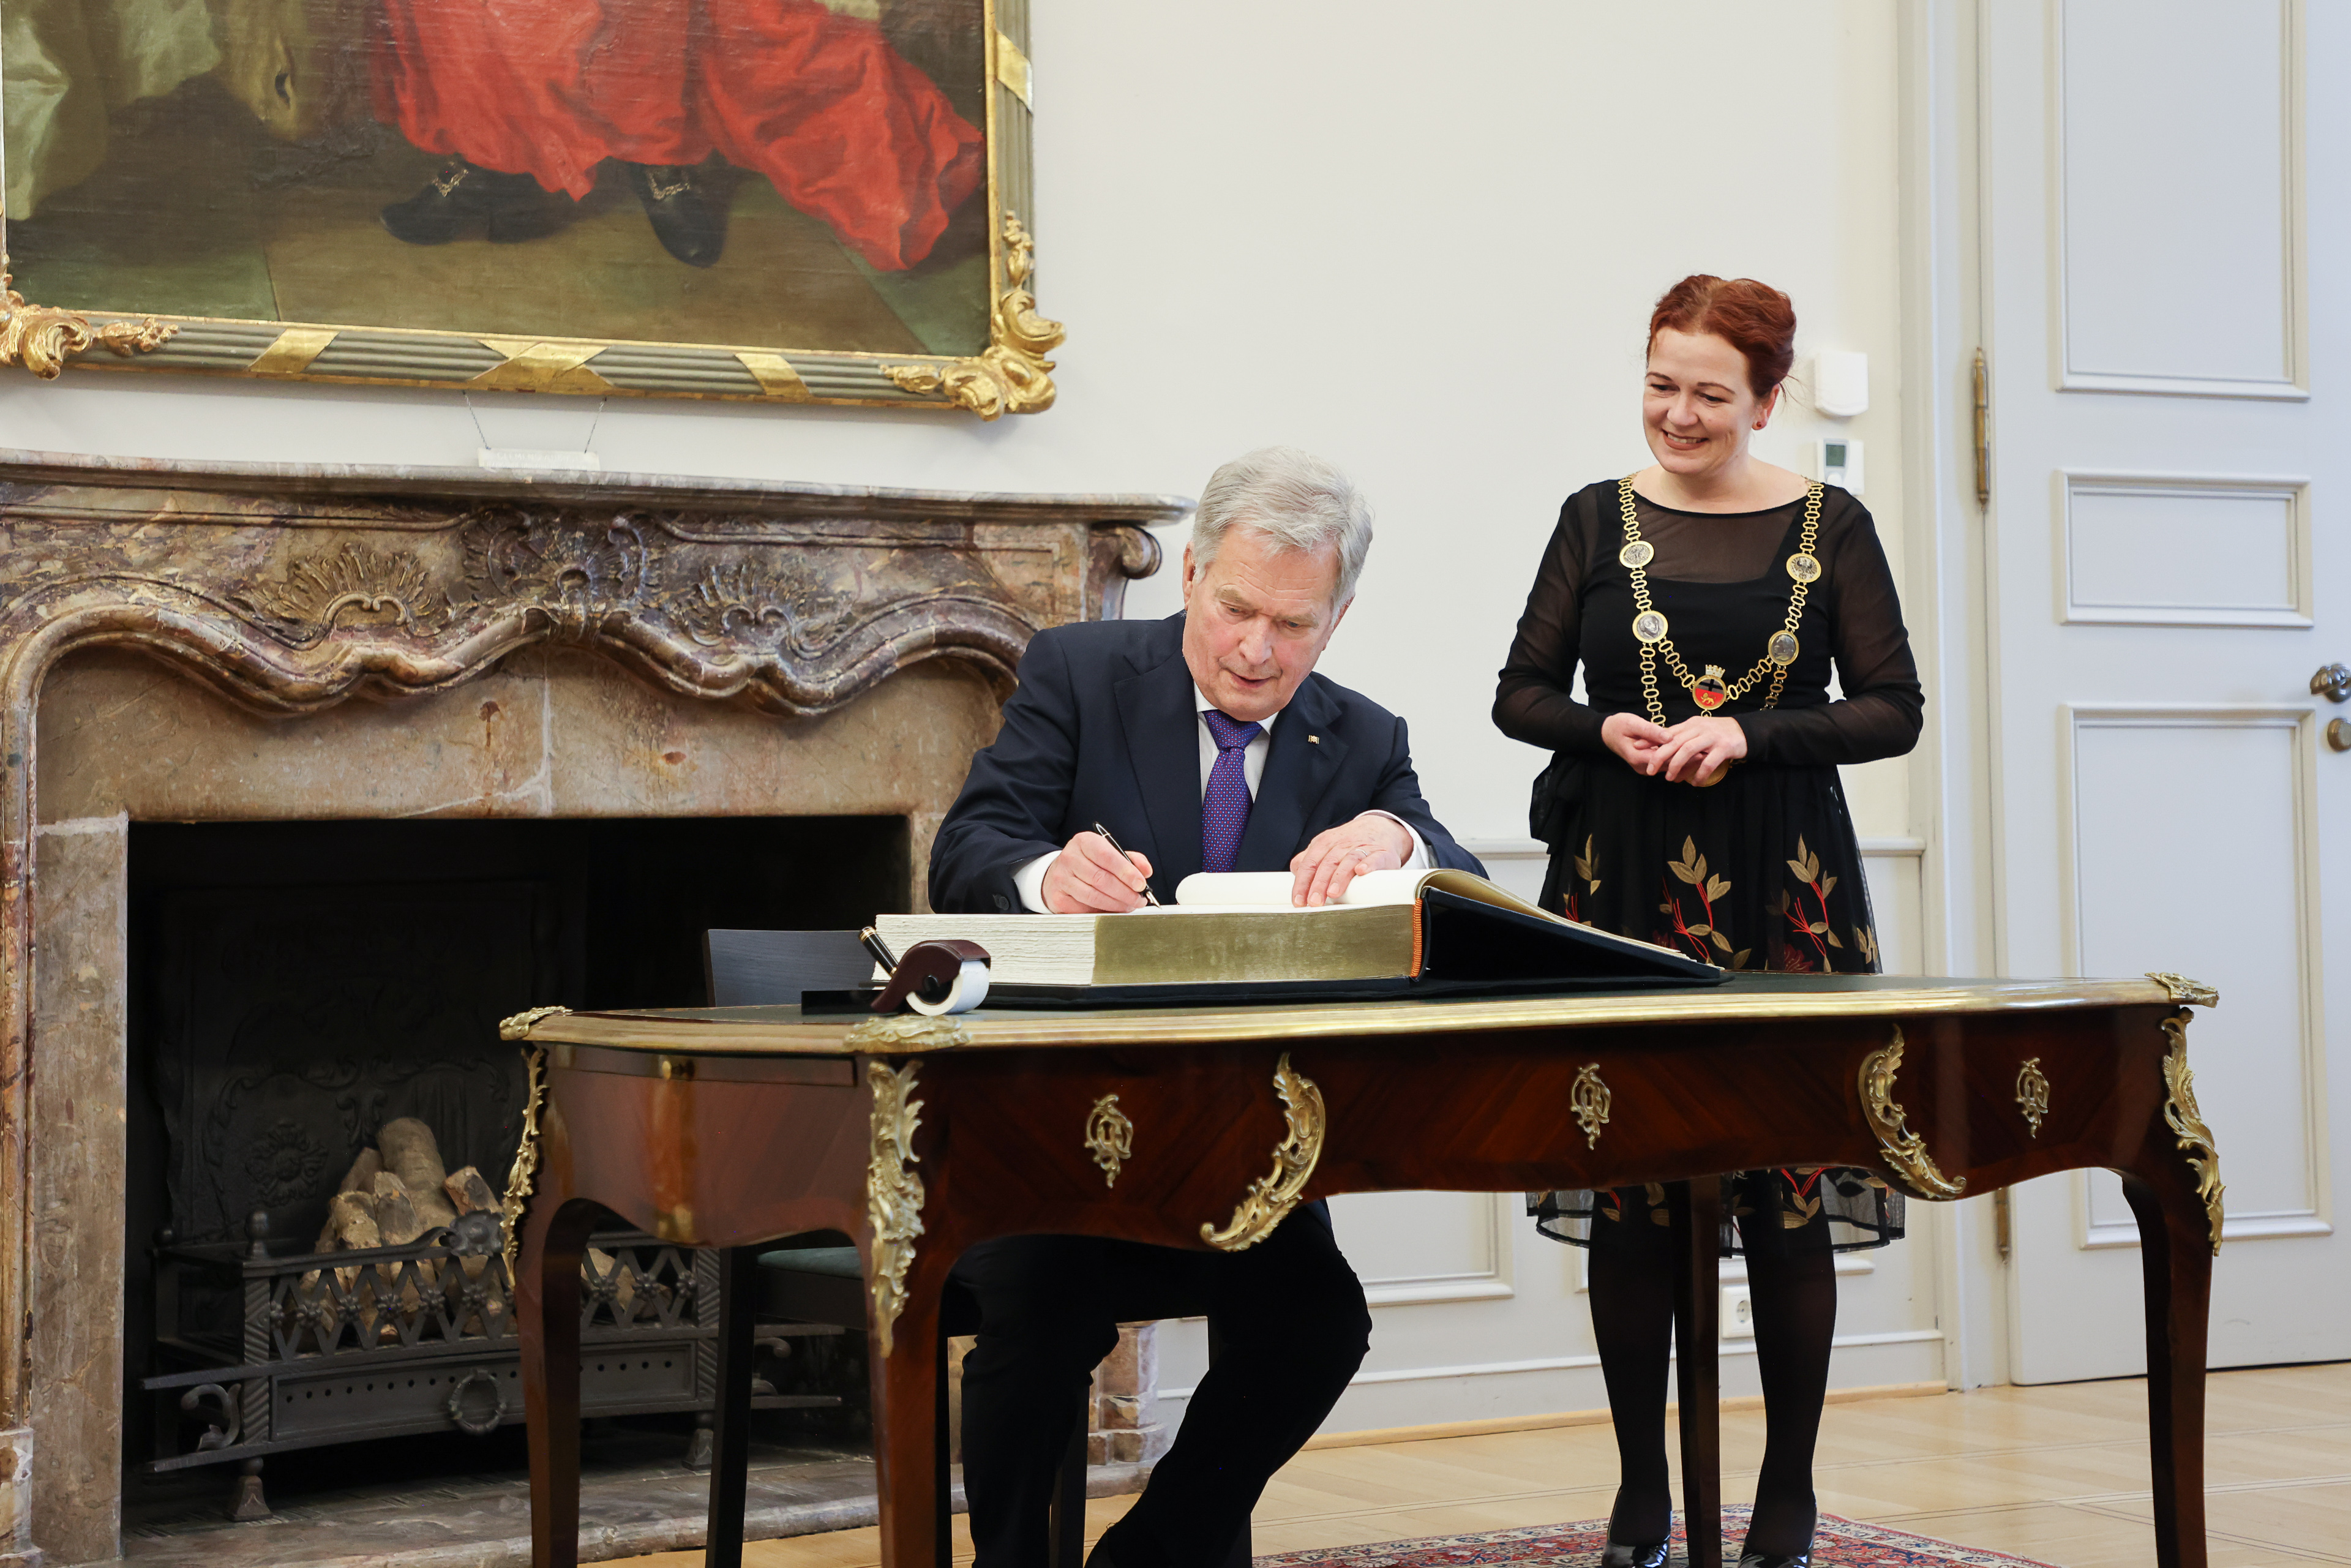 In the Old City of Bonn
President Niinistö signed the Golden Book of the Old Town Hall. Photo: Riikka Hietajärvi/Office of the President of the Republic of Finland